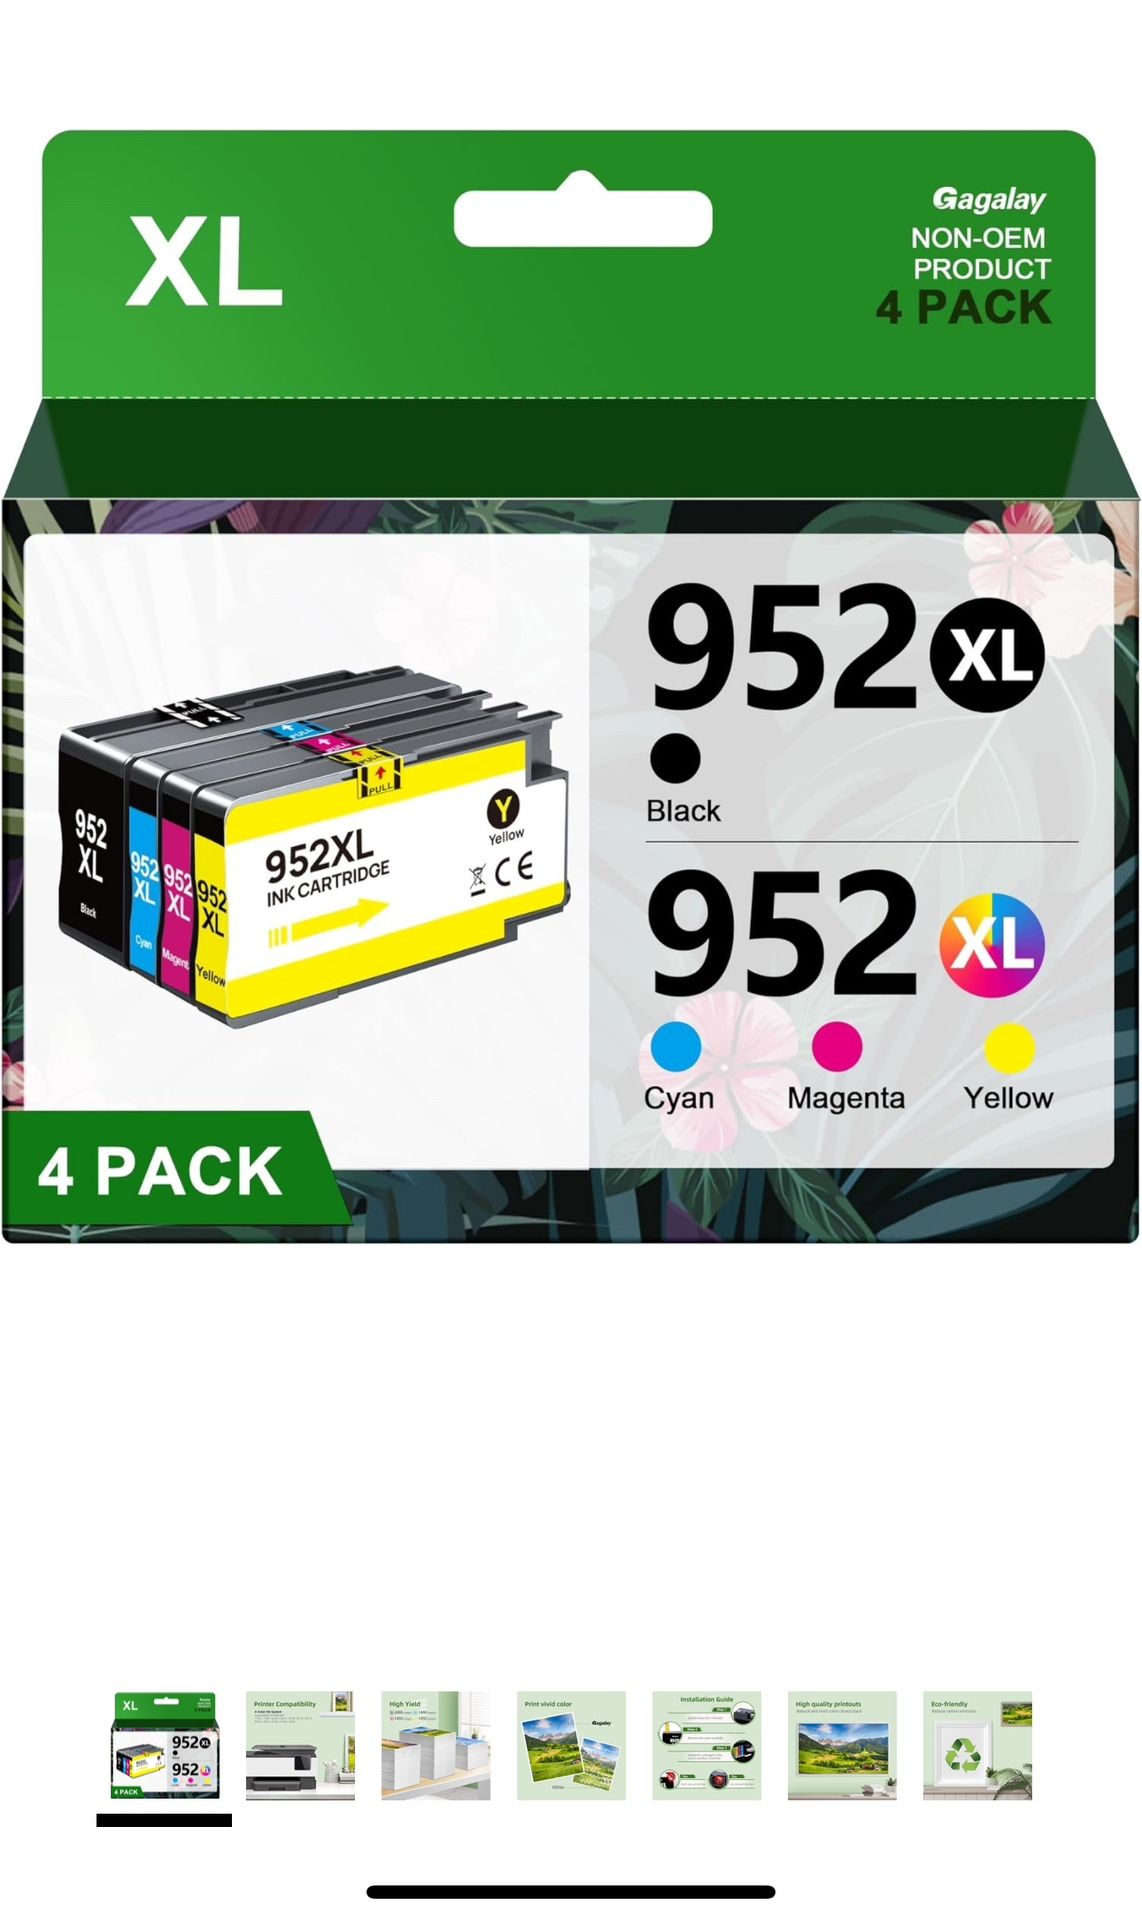 952XL Ink Cartridges Combo Pack Latest Upgrade Replacement for HP 952 XL Ink Cartridges Work with Officejet Pro 8 8 8 8725 (4 